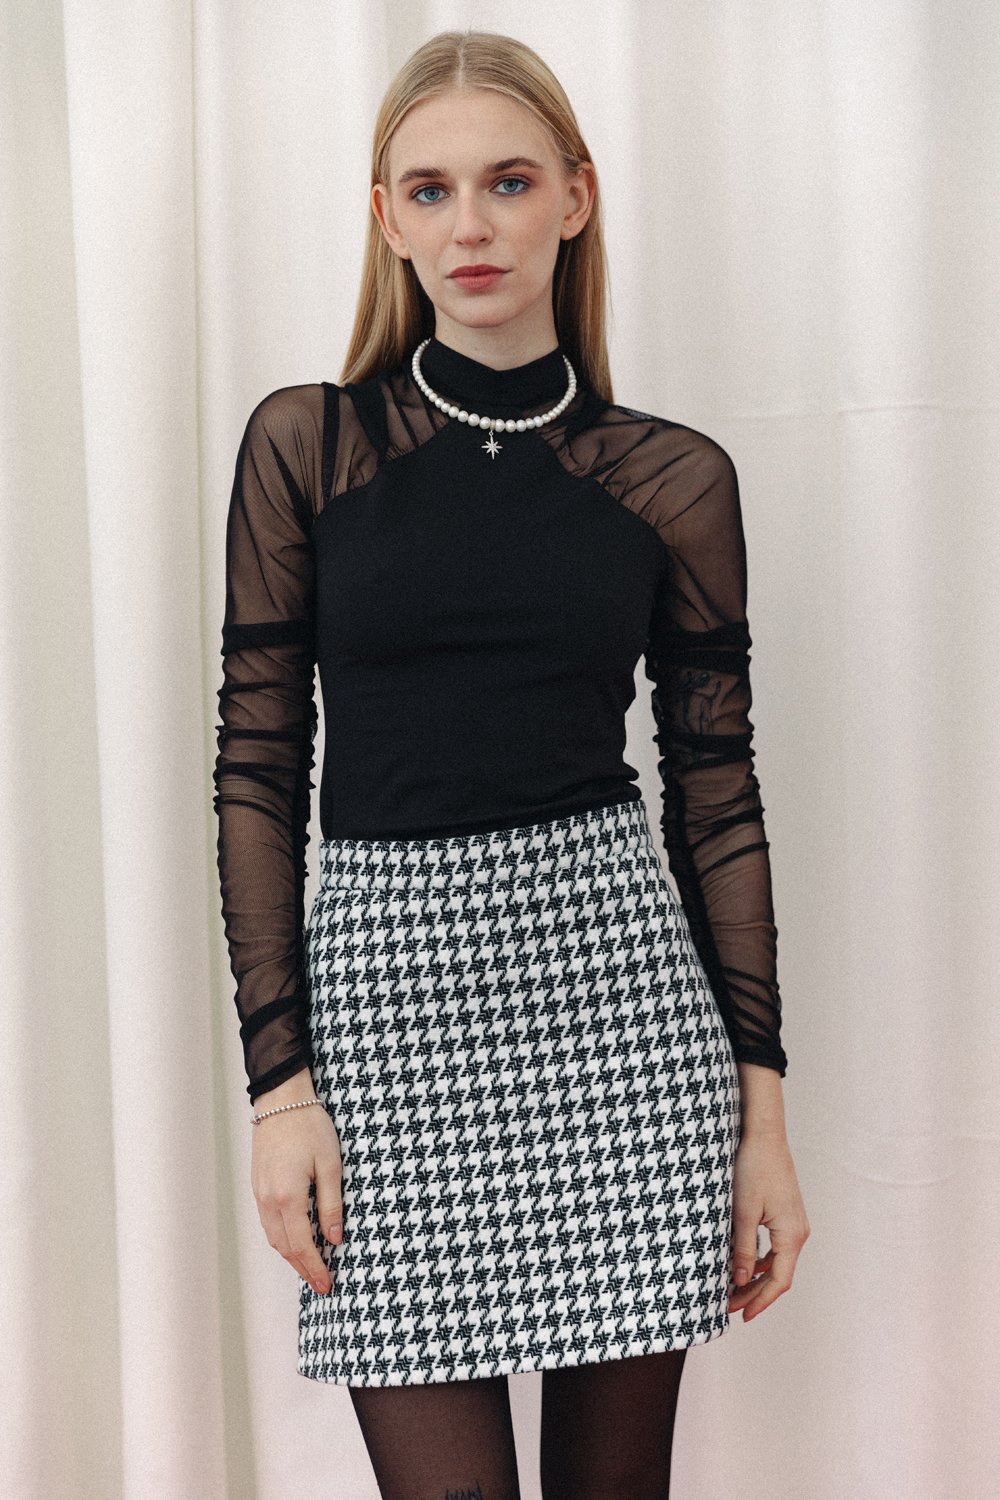 A-line skirt with houndstooth print